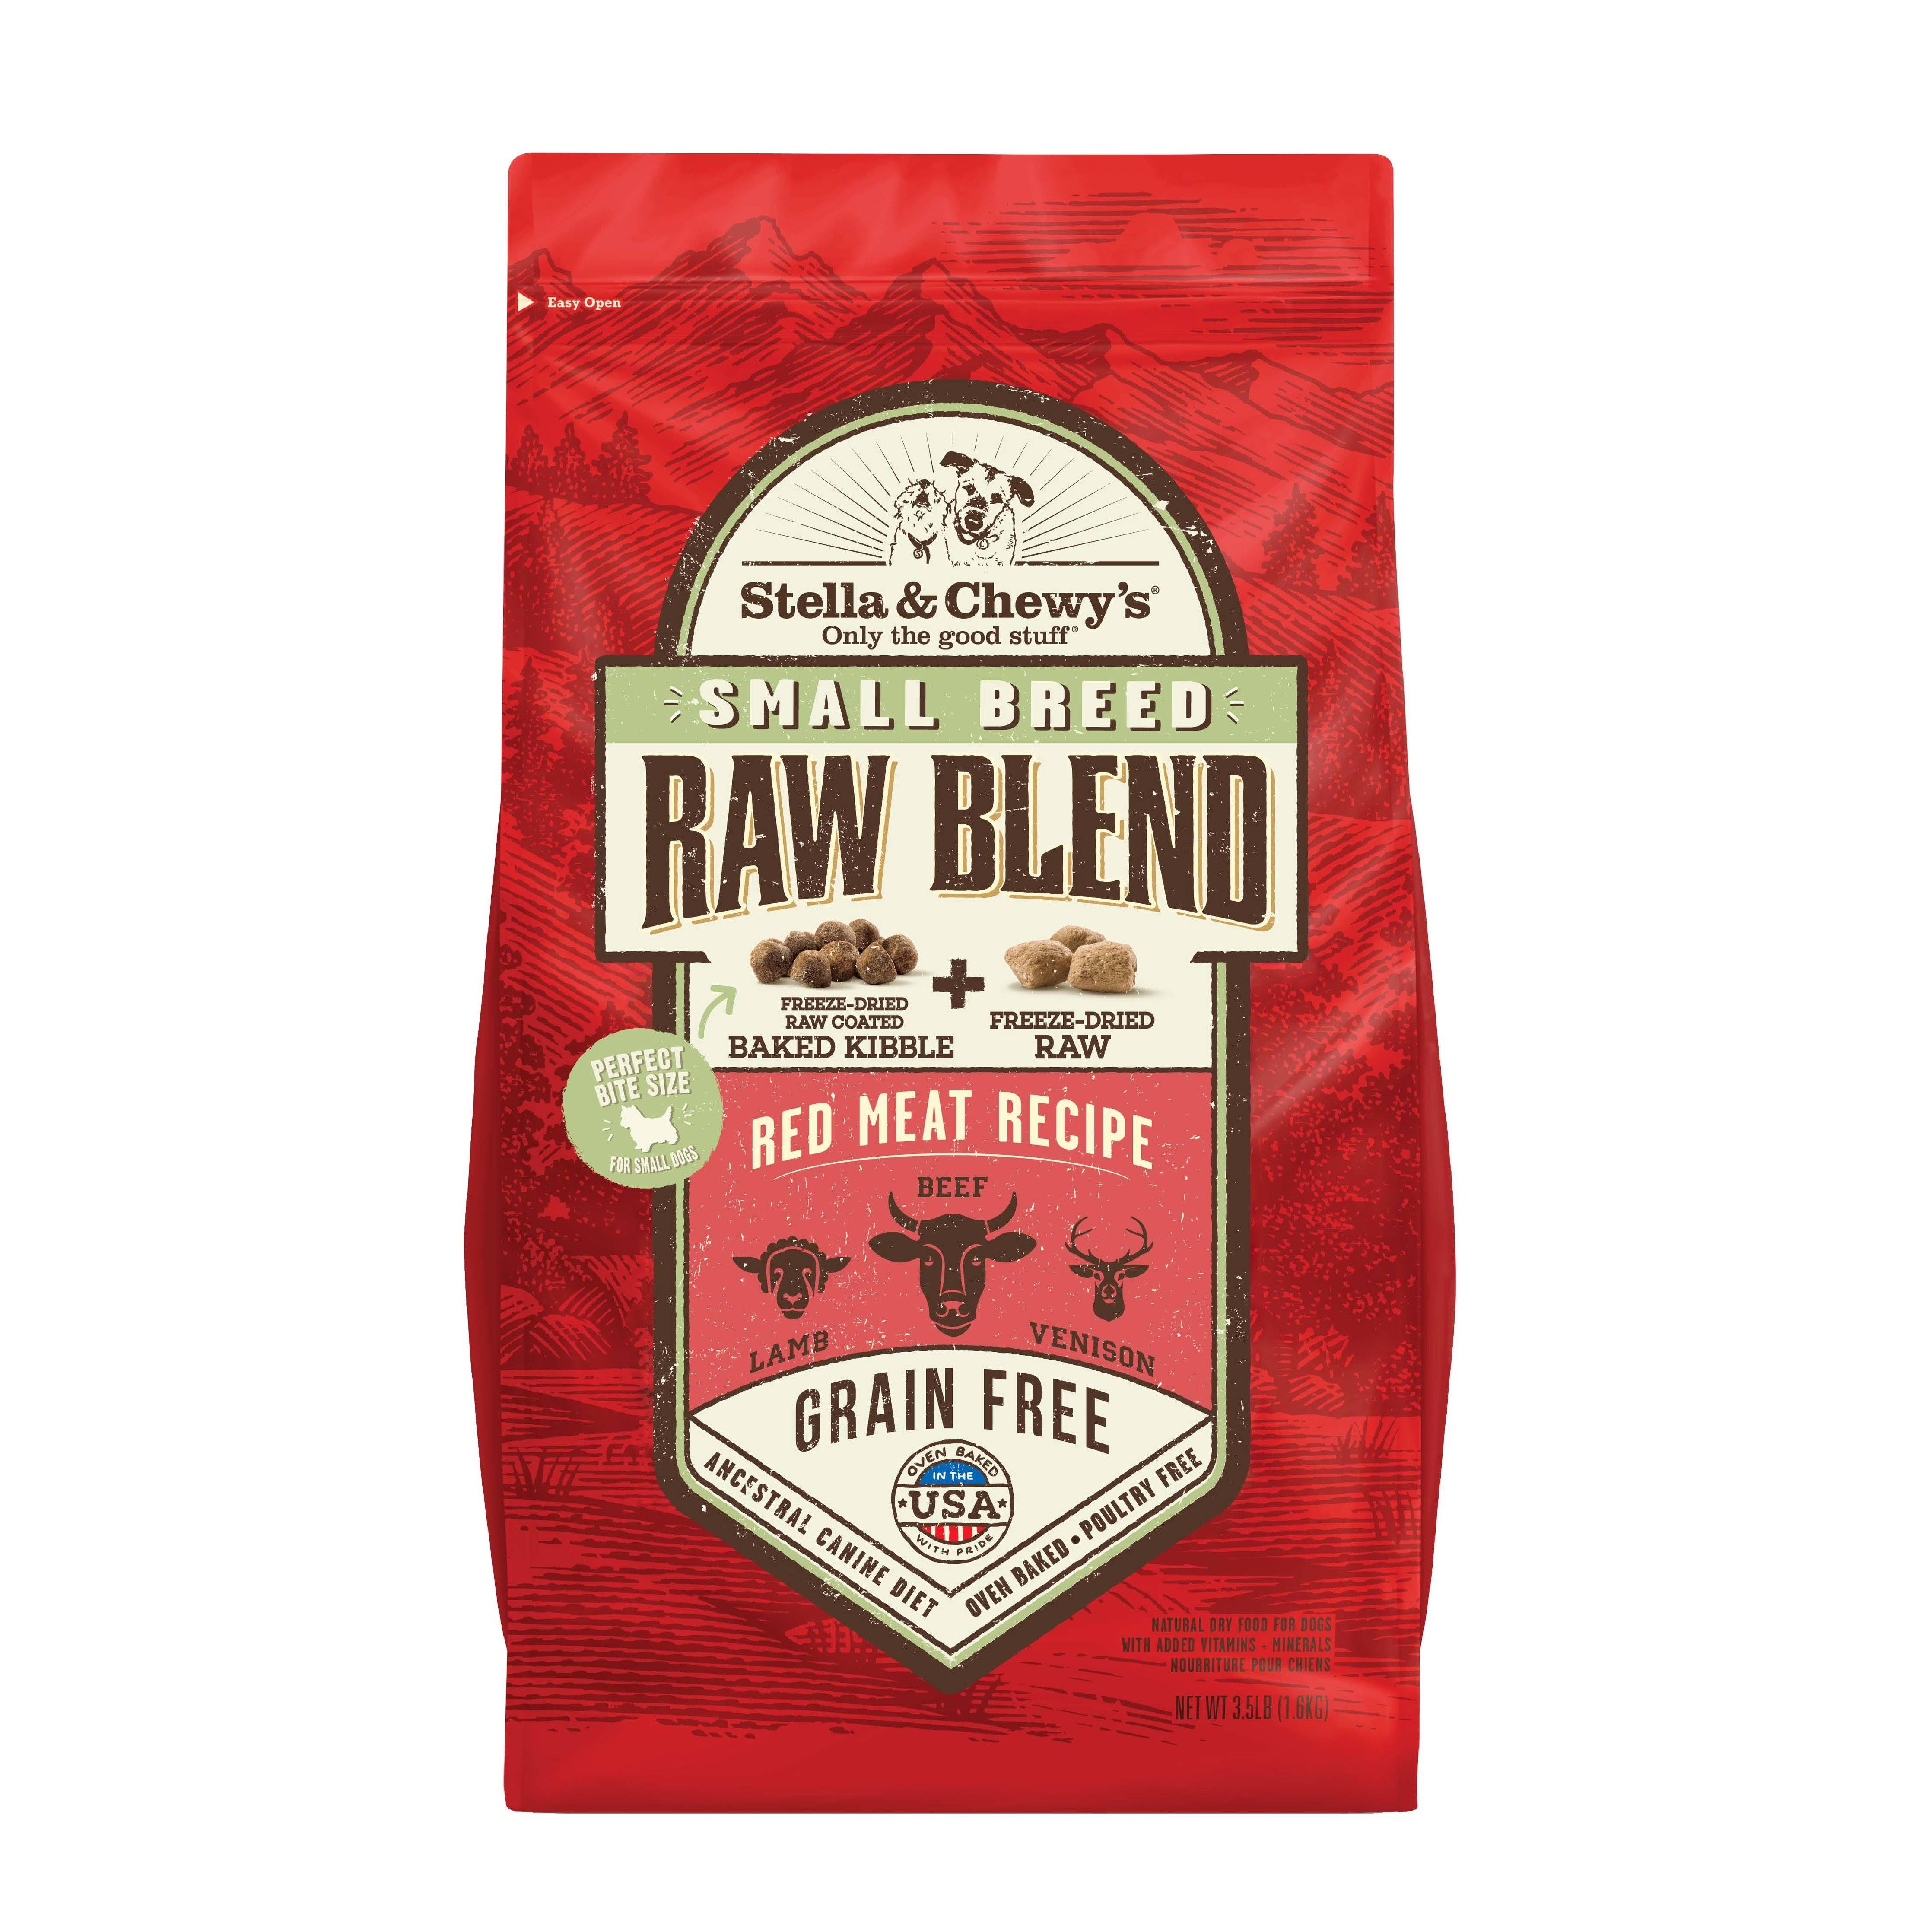 Stella & Chewy's - Raw Blend Small Breed Red Meat - Dog Food - 3.5lb